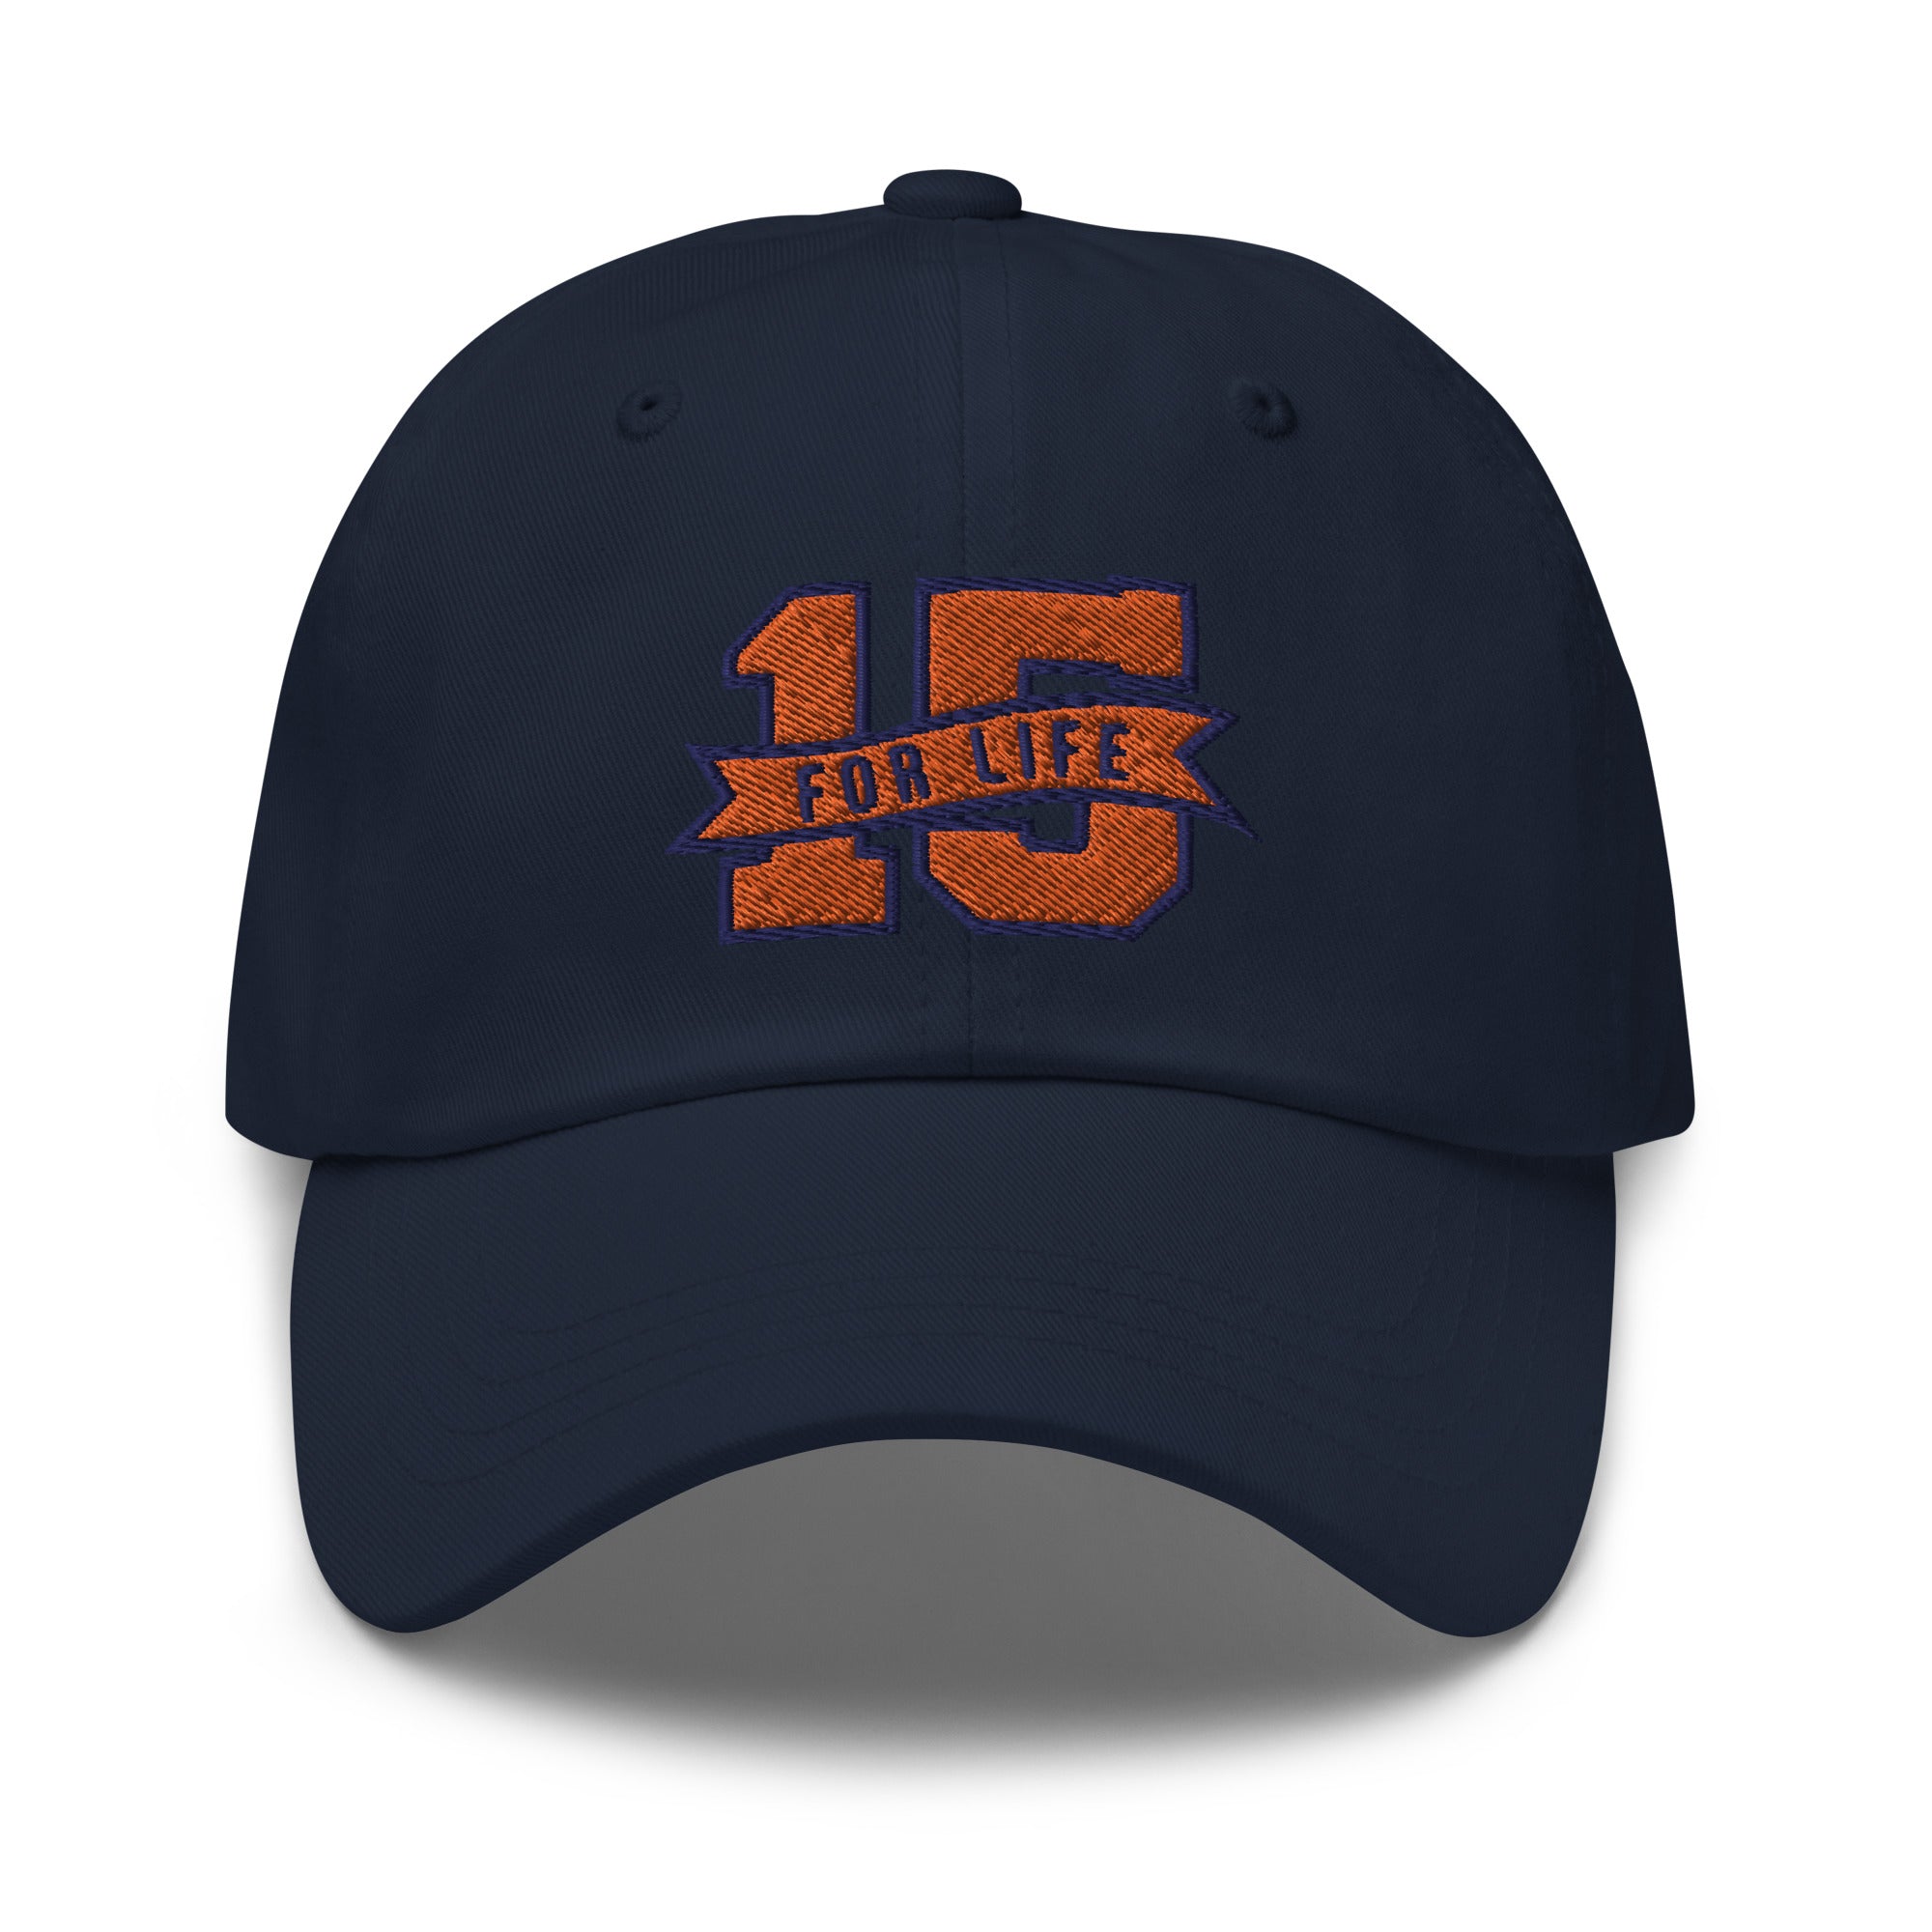 15 For Life Dad hat